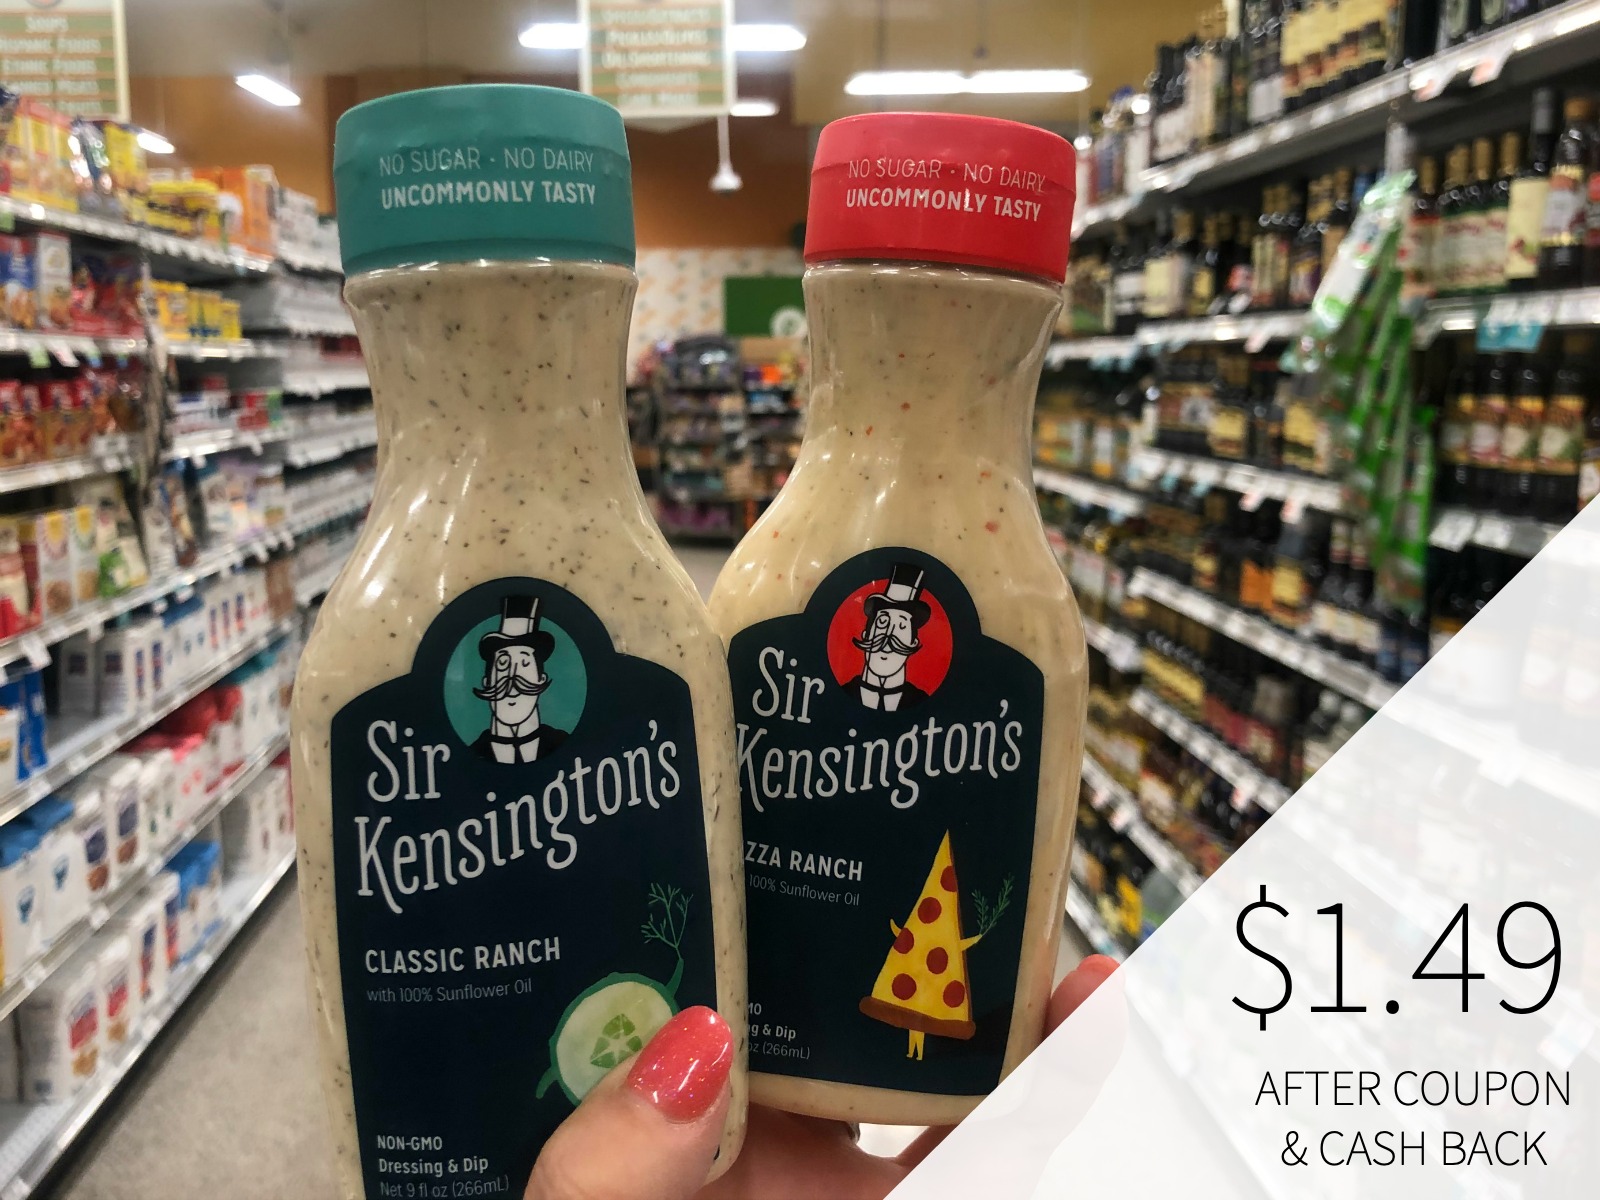 Pick Up A Huge Discount On Sir Kensington's Ranch - As Low As $1.49 At Publix! on I Heart Publix